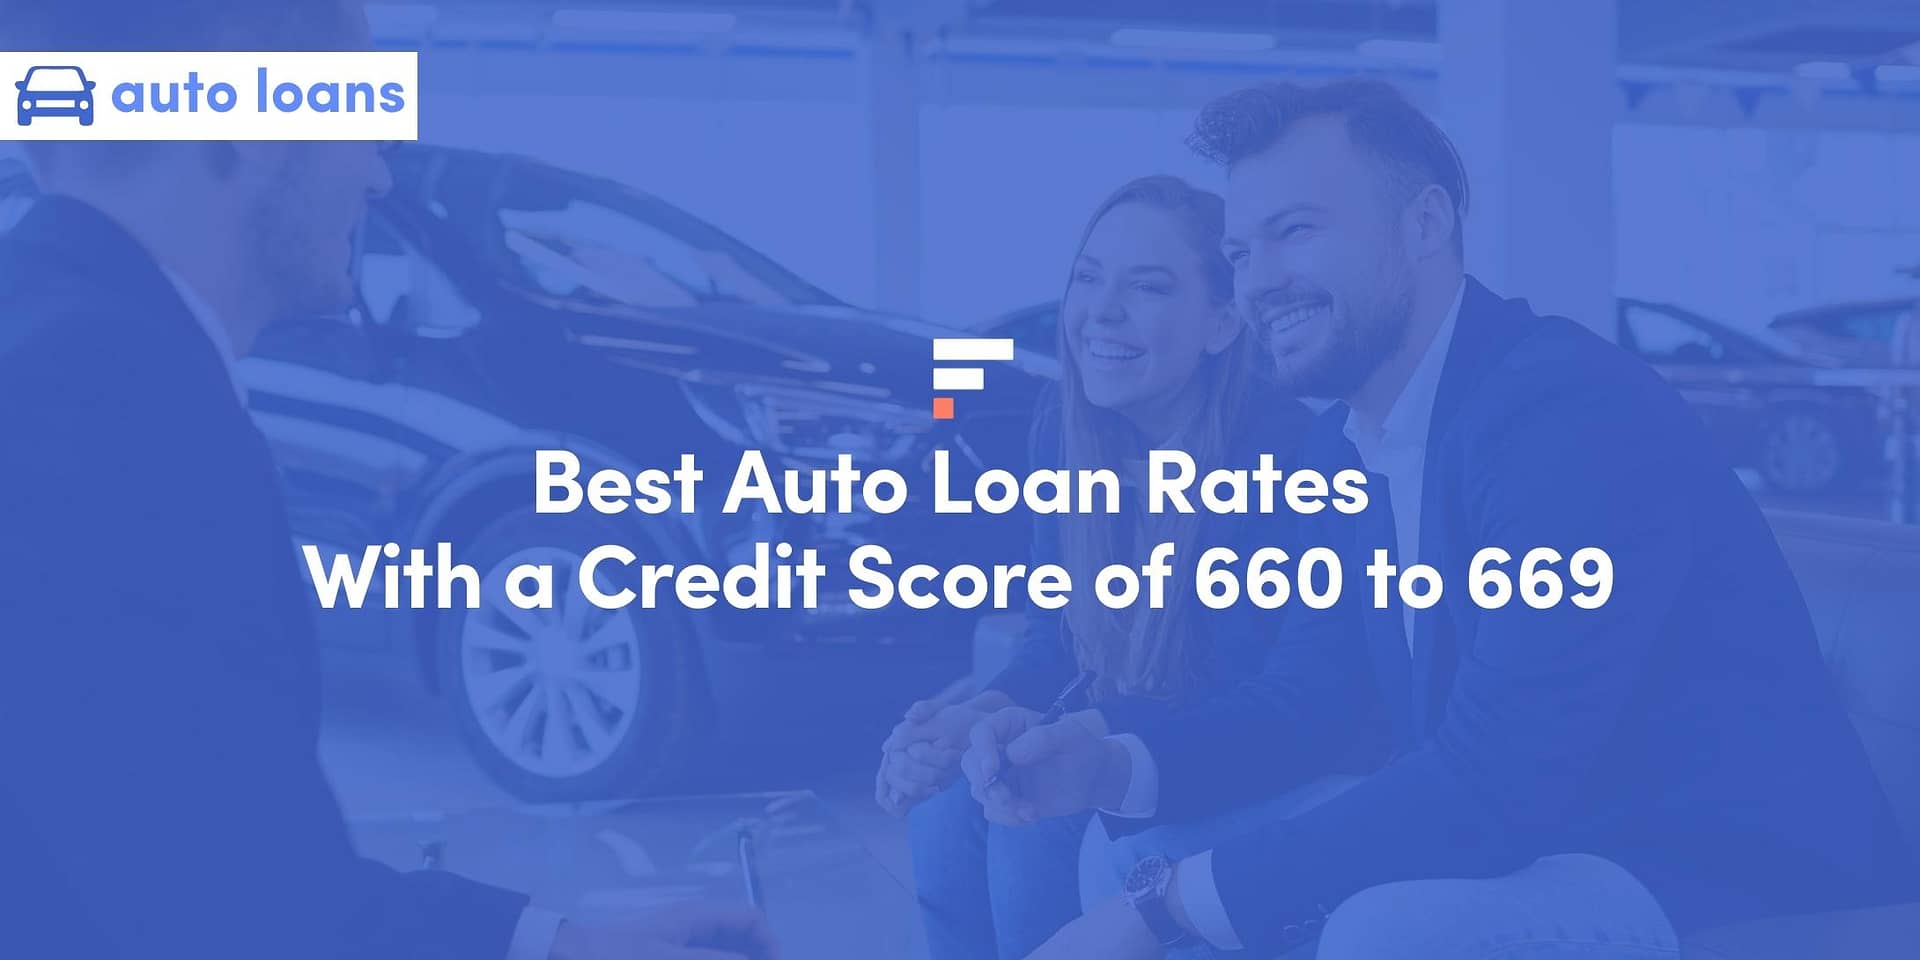 Best Auto Loan Rates With a Credit Score of 660 to 669